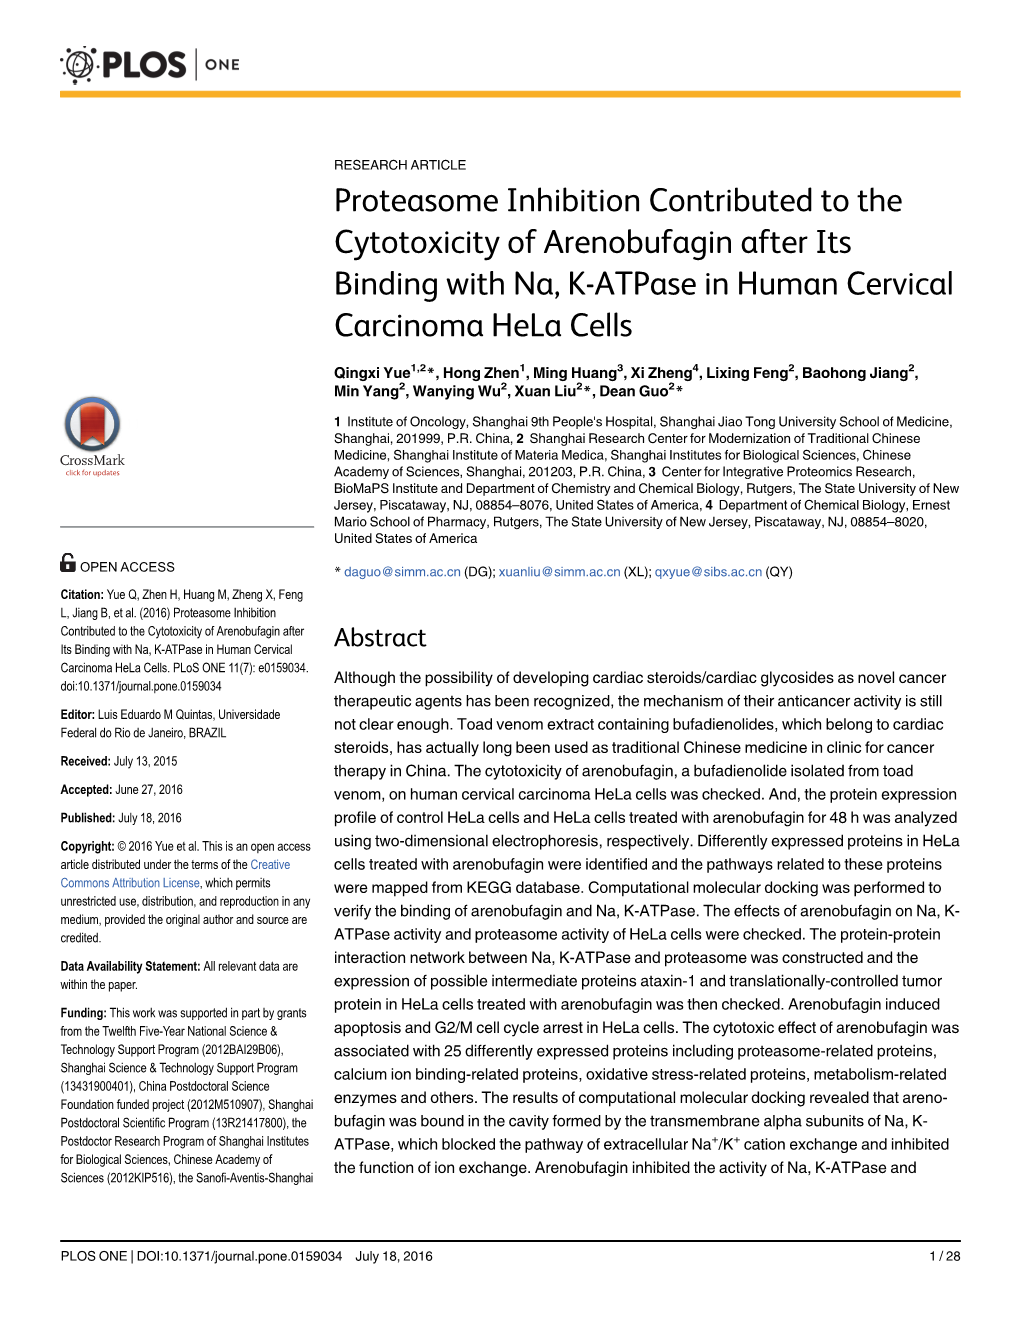 Proteasome Inhibition Contributed to the Cytotoxicity of Arenobufagin After Its Binding with Na, K-Atpase in Human Cervical Carcinoma Hela Cells